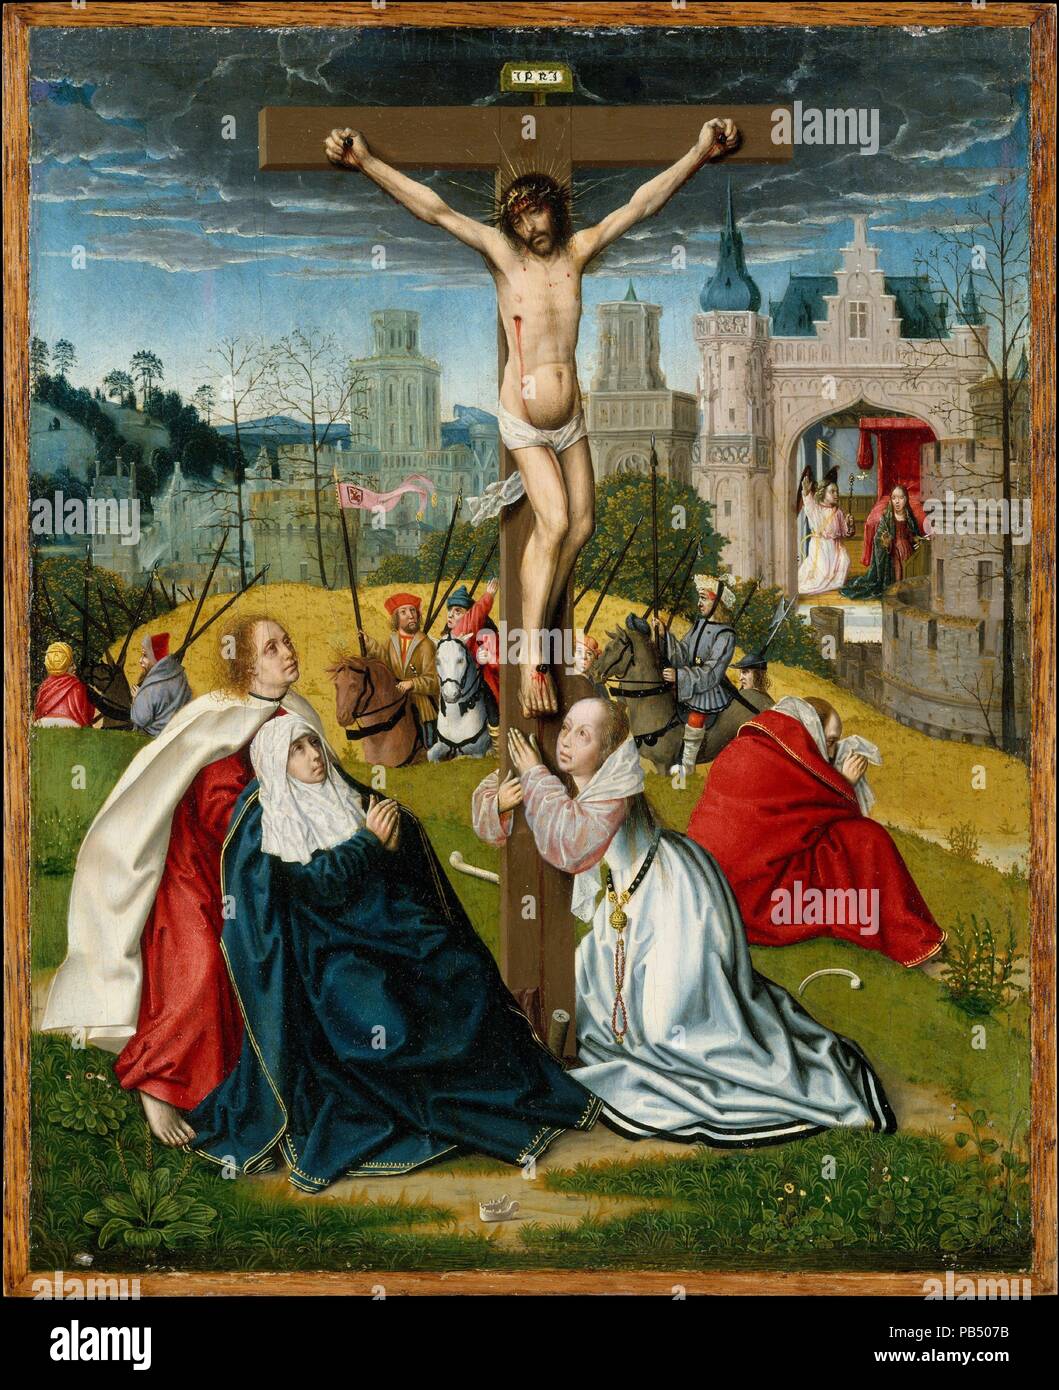 The Crucifixion. Artist: Attributed to Jan Provost (Netherlandish, Mons (Bergen) ca. 1465-1529 Bruges). Dimensions: Overall 13 1/8 x 10 3/4 in. (33.3 x 27.3 cm); painted surface 12 5/8 x 10 1/4 in. (32.1 x 26 cm). Date: ca. 1495.  This exquisite private devotional painting contrasts Mary's joy at the Annunciation, shown in the background, with her sorrow at the Crucifixion, where she swoons in John's arms. The darkened sky heightens the poignancy of the Passion scene. Scattered around the cross are bones, referring to the belief that Adam's skull was located on Golgotha. The pairing of the Ann Stock Photo